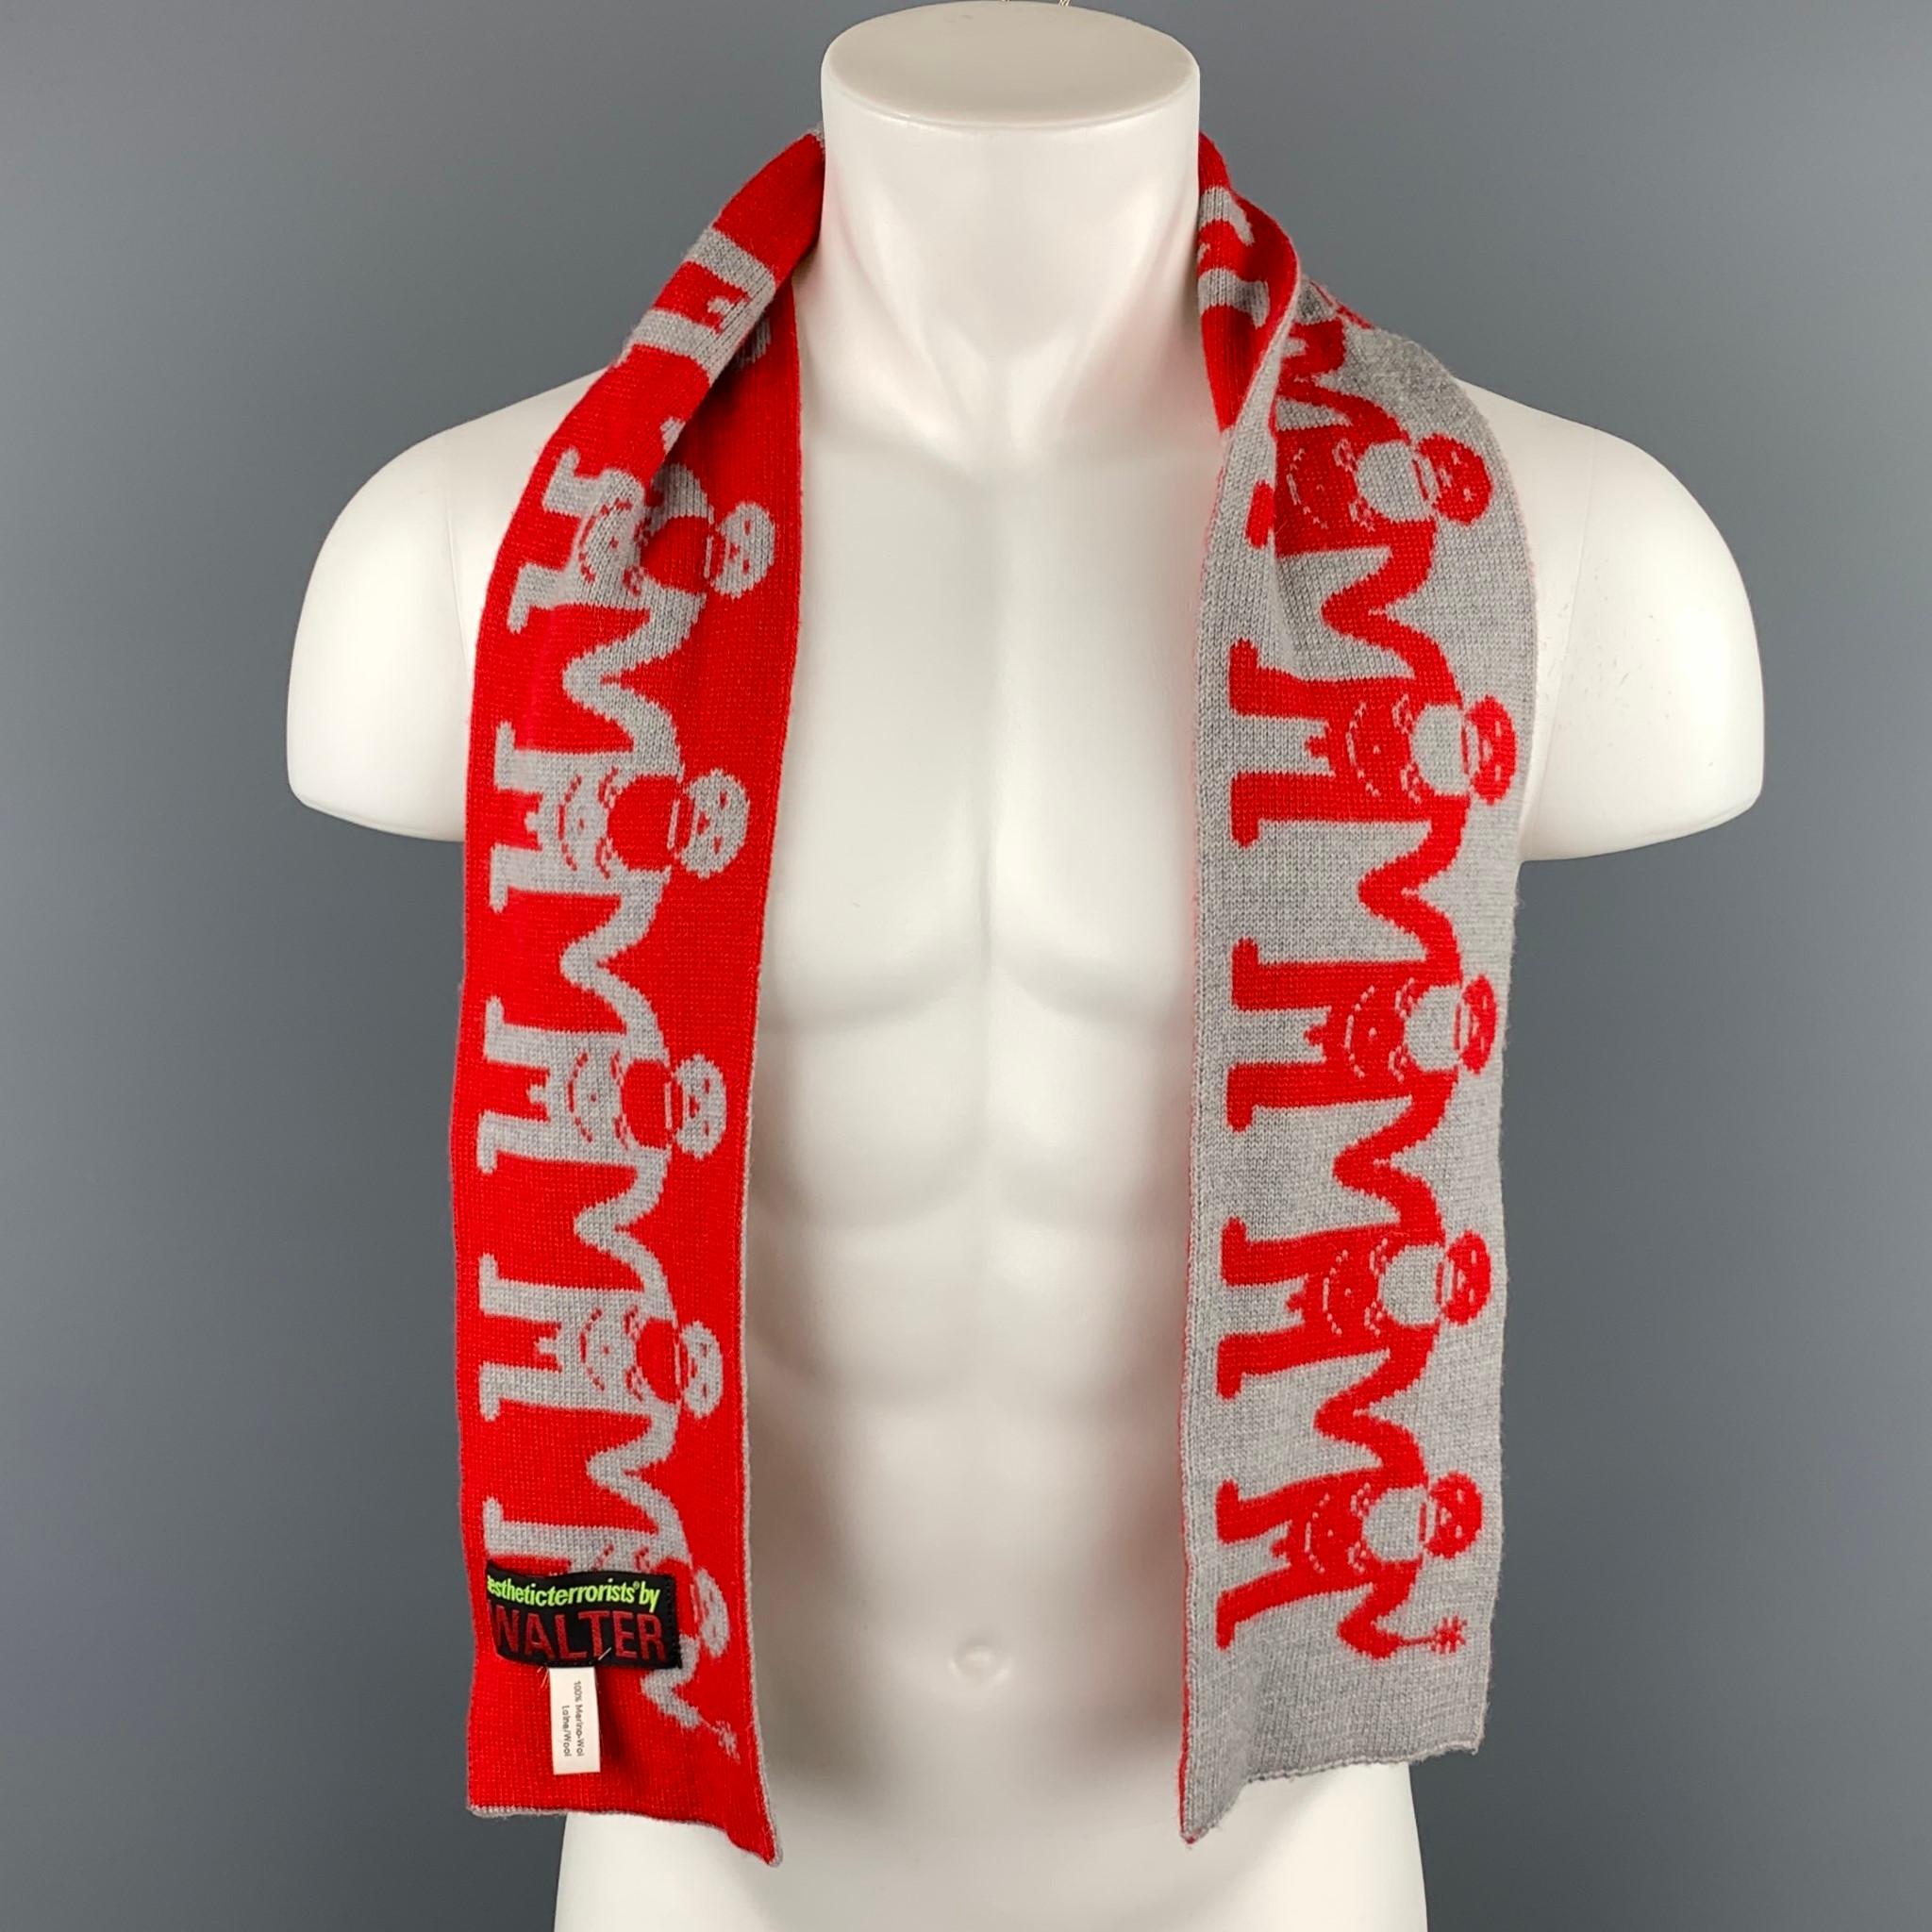 AESTHETICTERRORISTS by WALTER VAN BEIRENDONCK scarf comes in a red & grey print merino wool. 

Very Good Pre-Owned Condition.

Measurements: 54 in. x 6 in. 